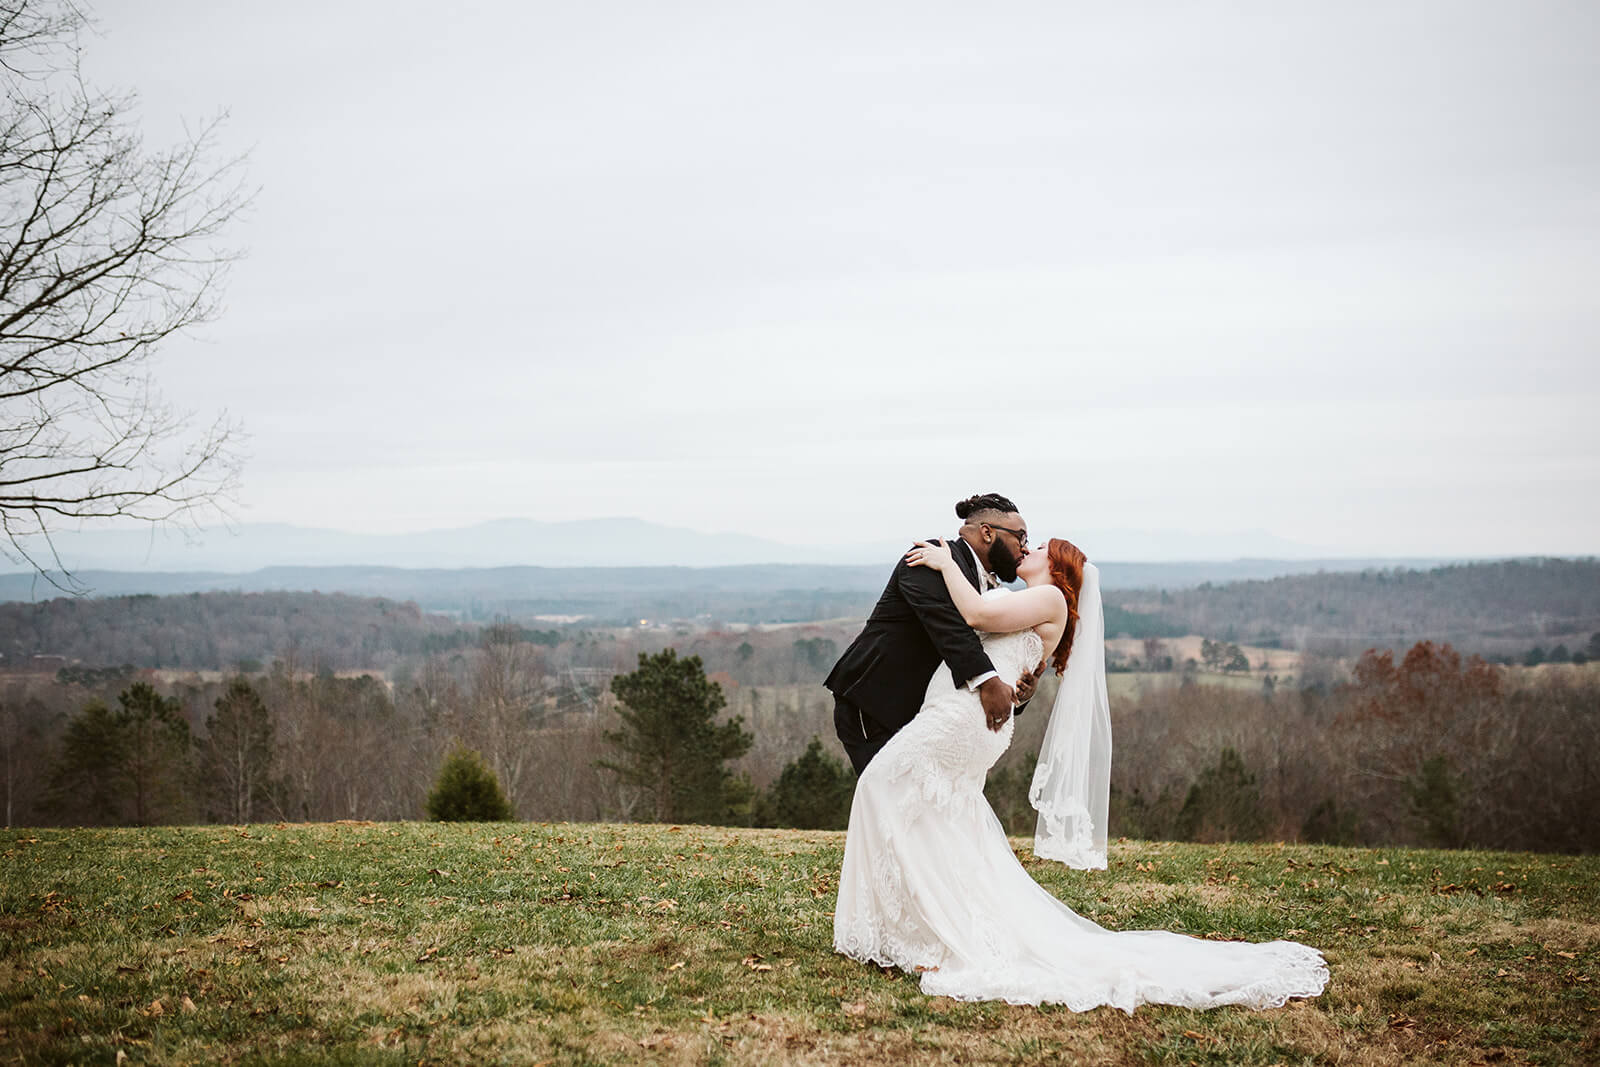 A groom dips his bride into a kiss in front of the Tennessee hills.